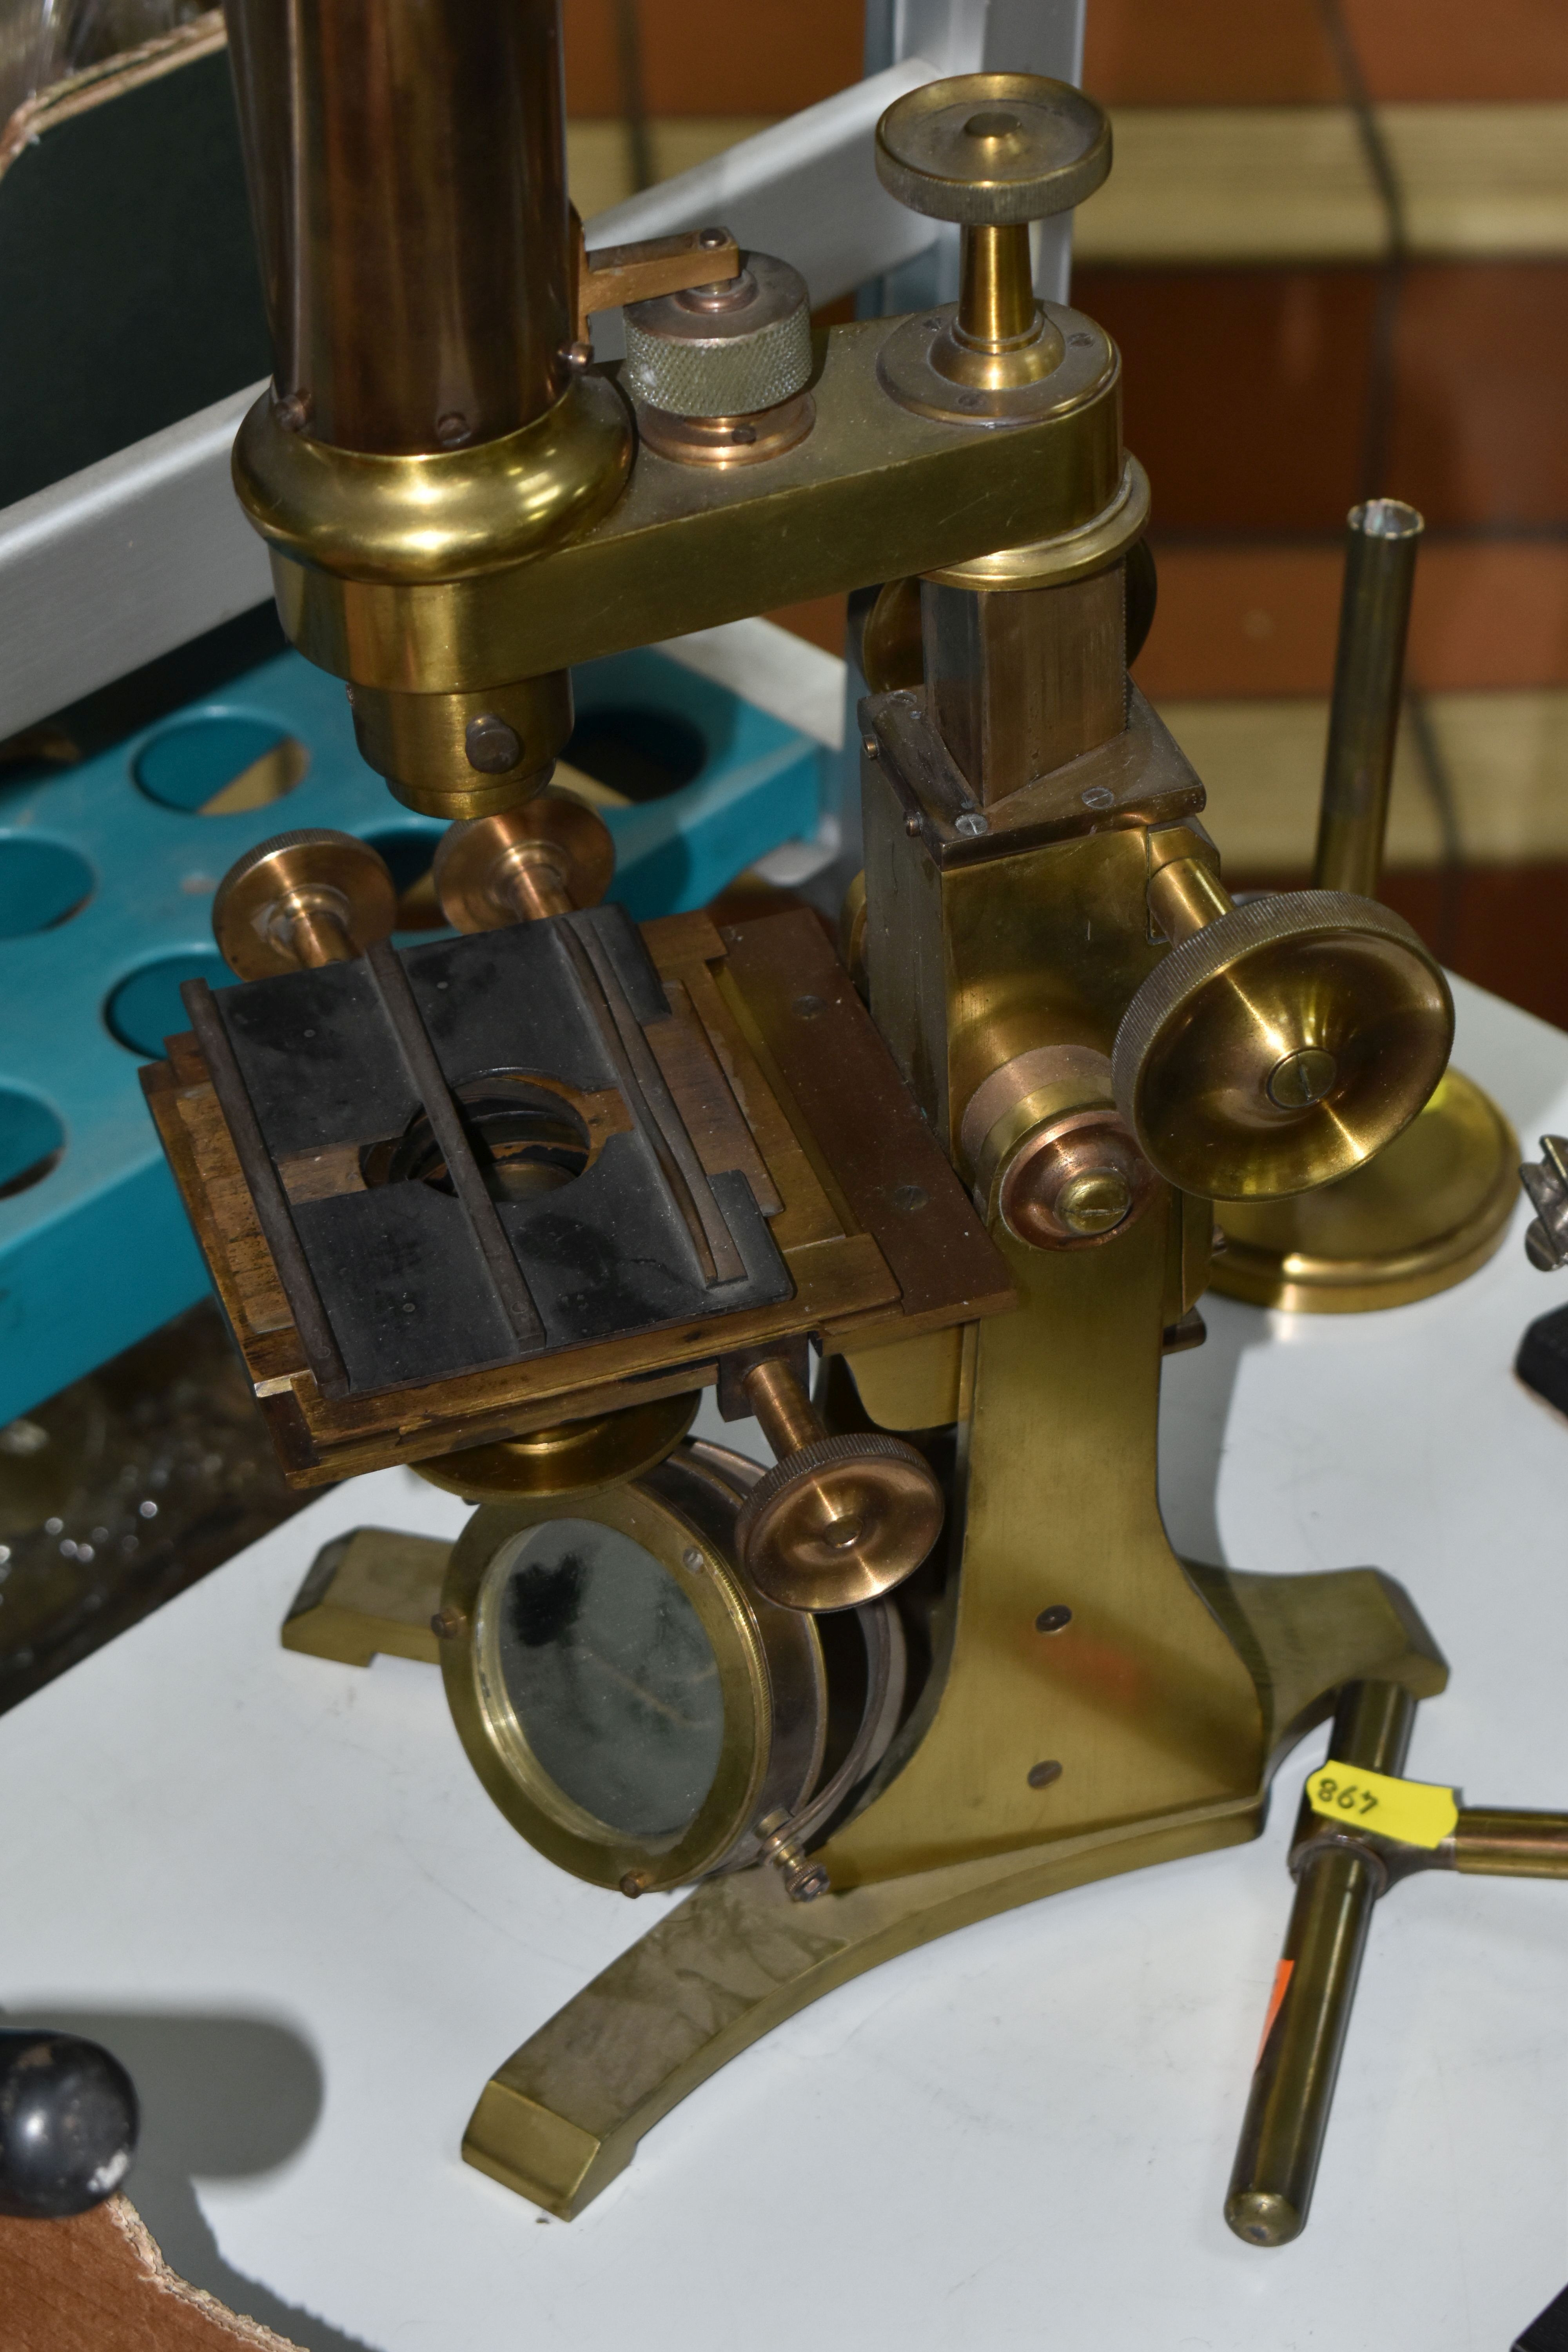 A LARGE BRASS VICTORIAN MICROSCOPE AND OTHER OPTICAL EQUIPMENT, a large double eyepiece microscope - Image 6 of 8